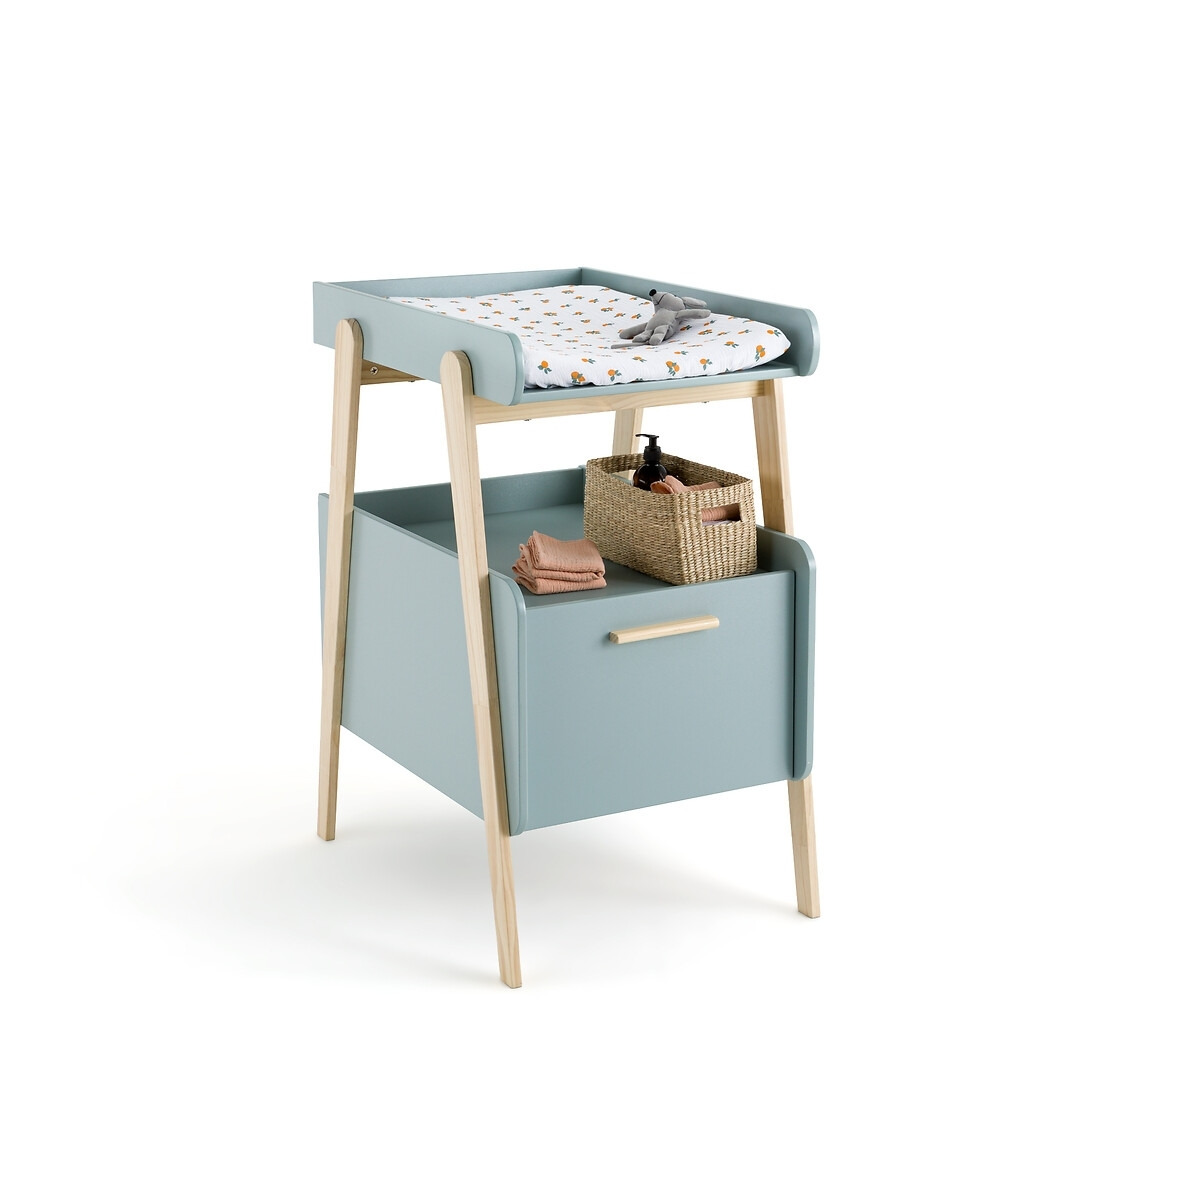 Oreade Changing Table with Drawer - image 1